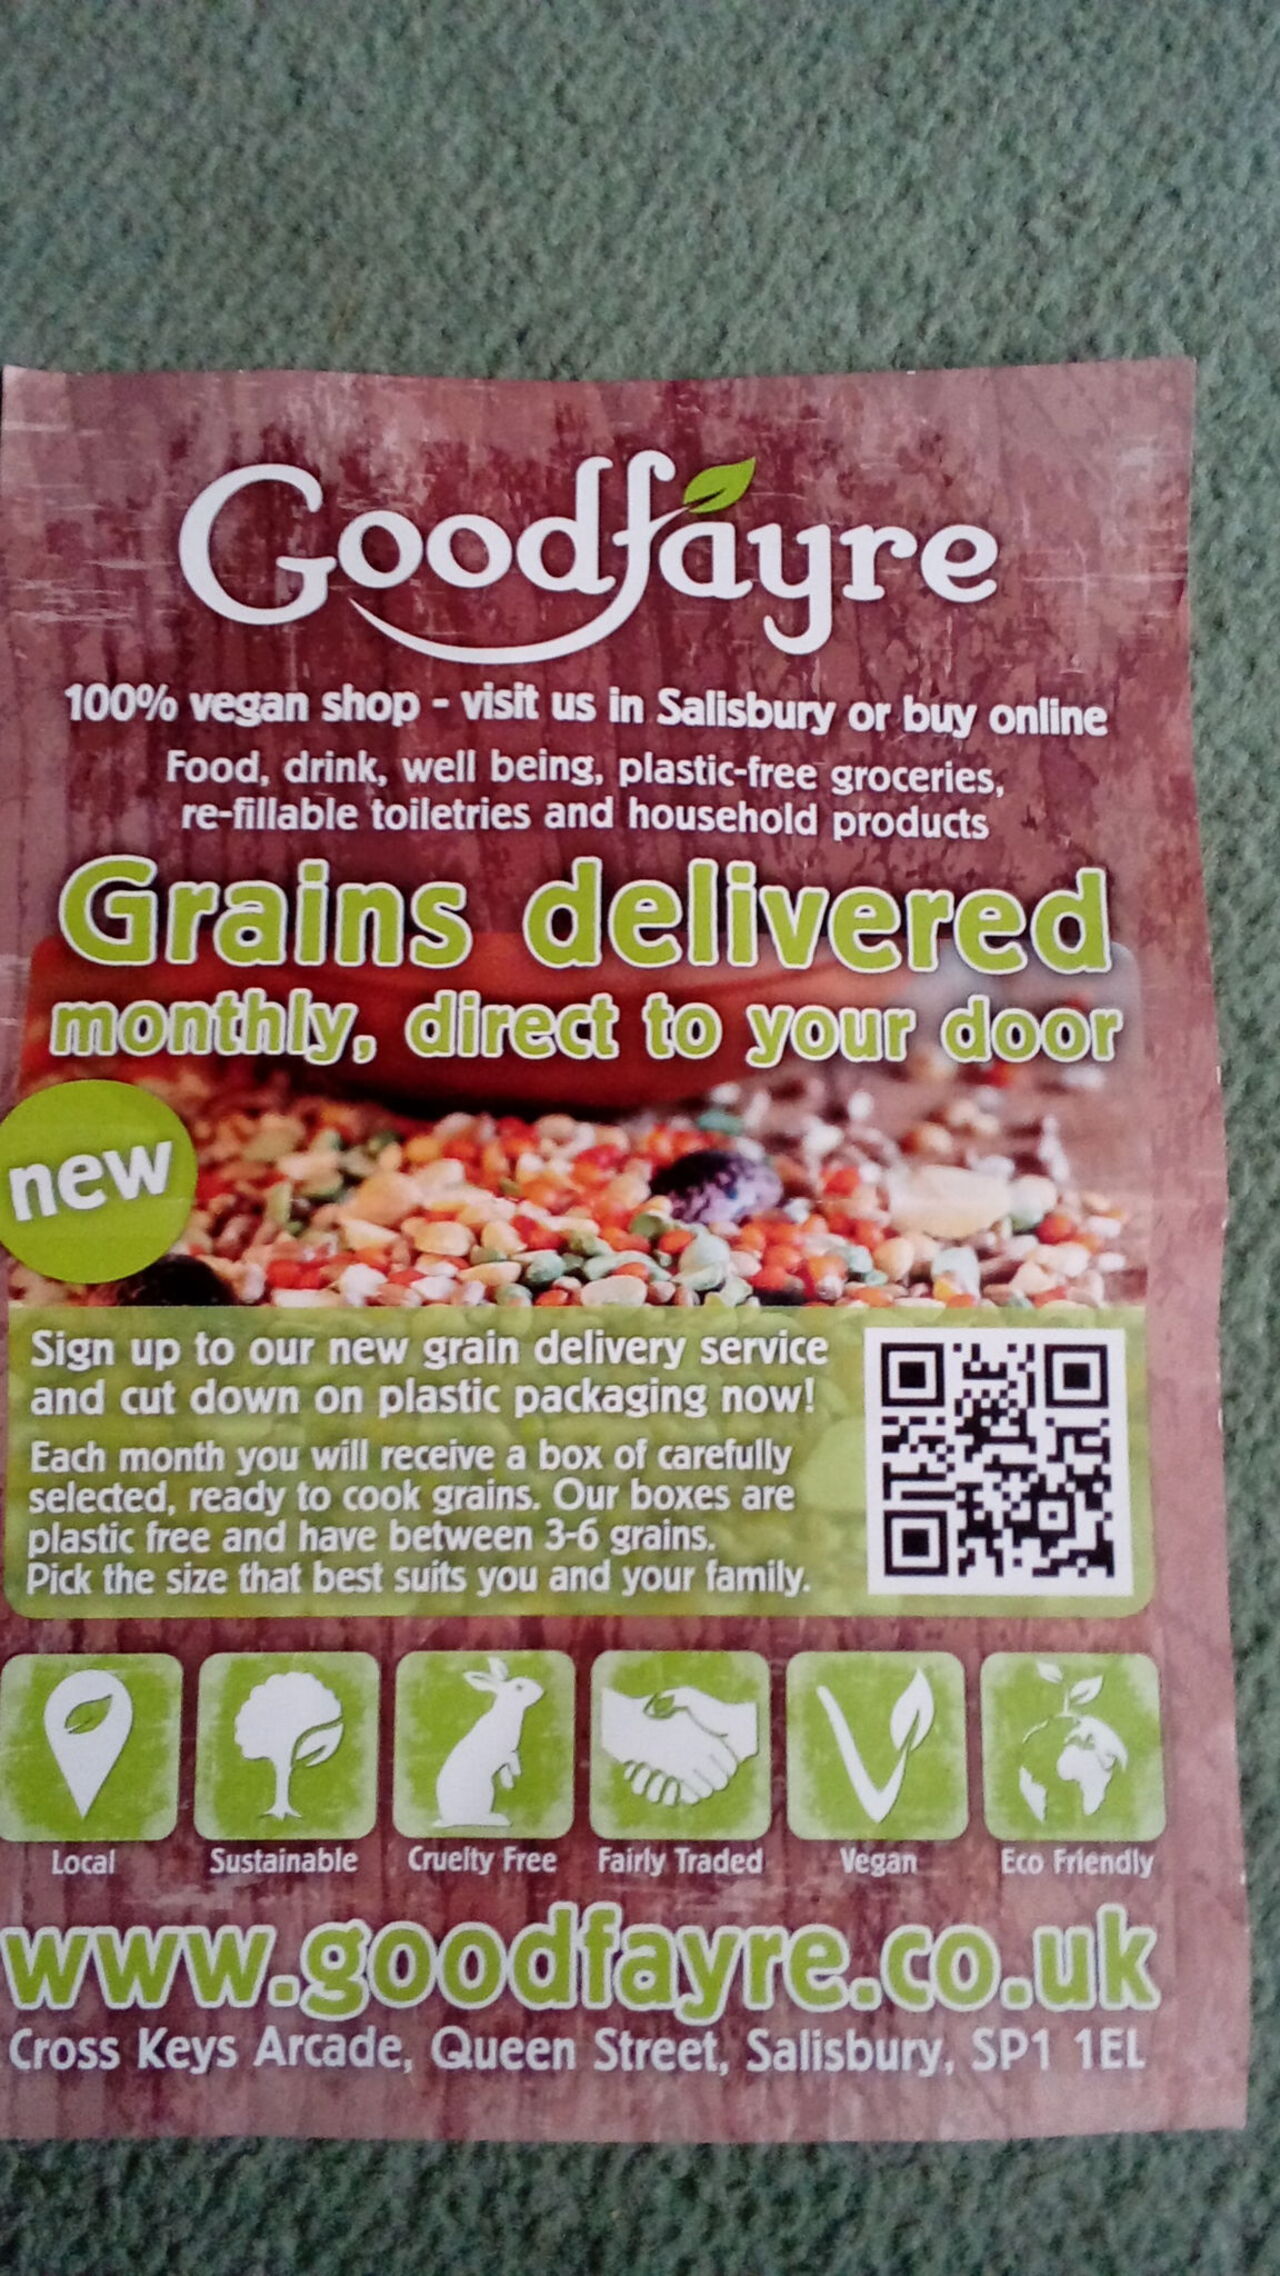 A photo of Goodfayre